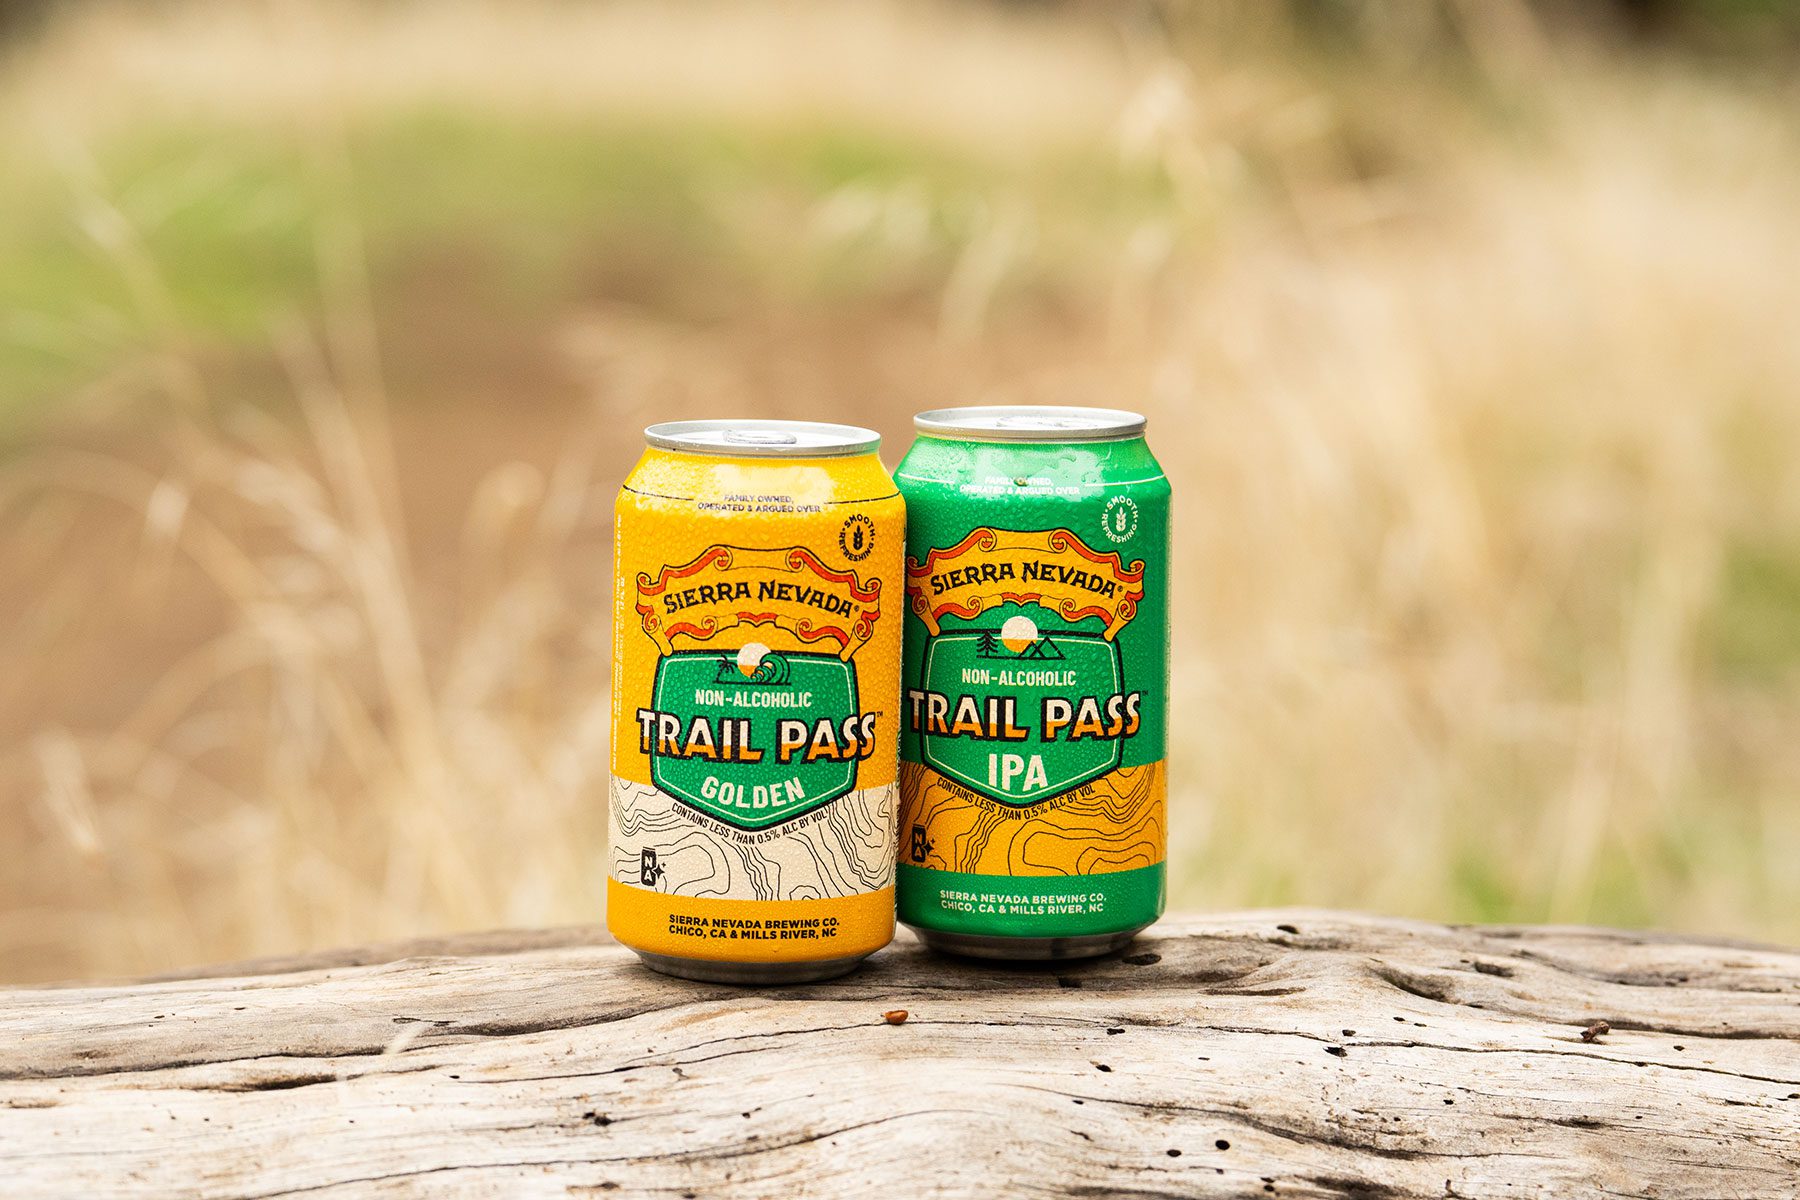 A can of non-alcoholic Sierra Nevada Trail Pass Golden and a can of Trail Pass IPA sitting on a log